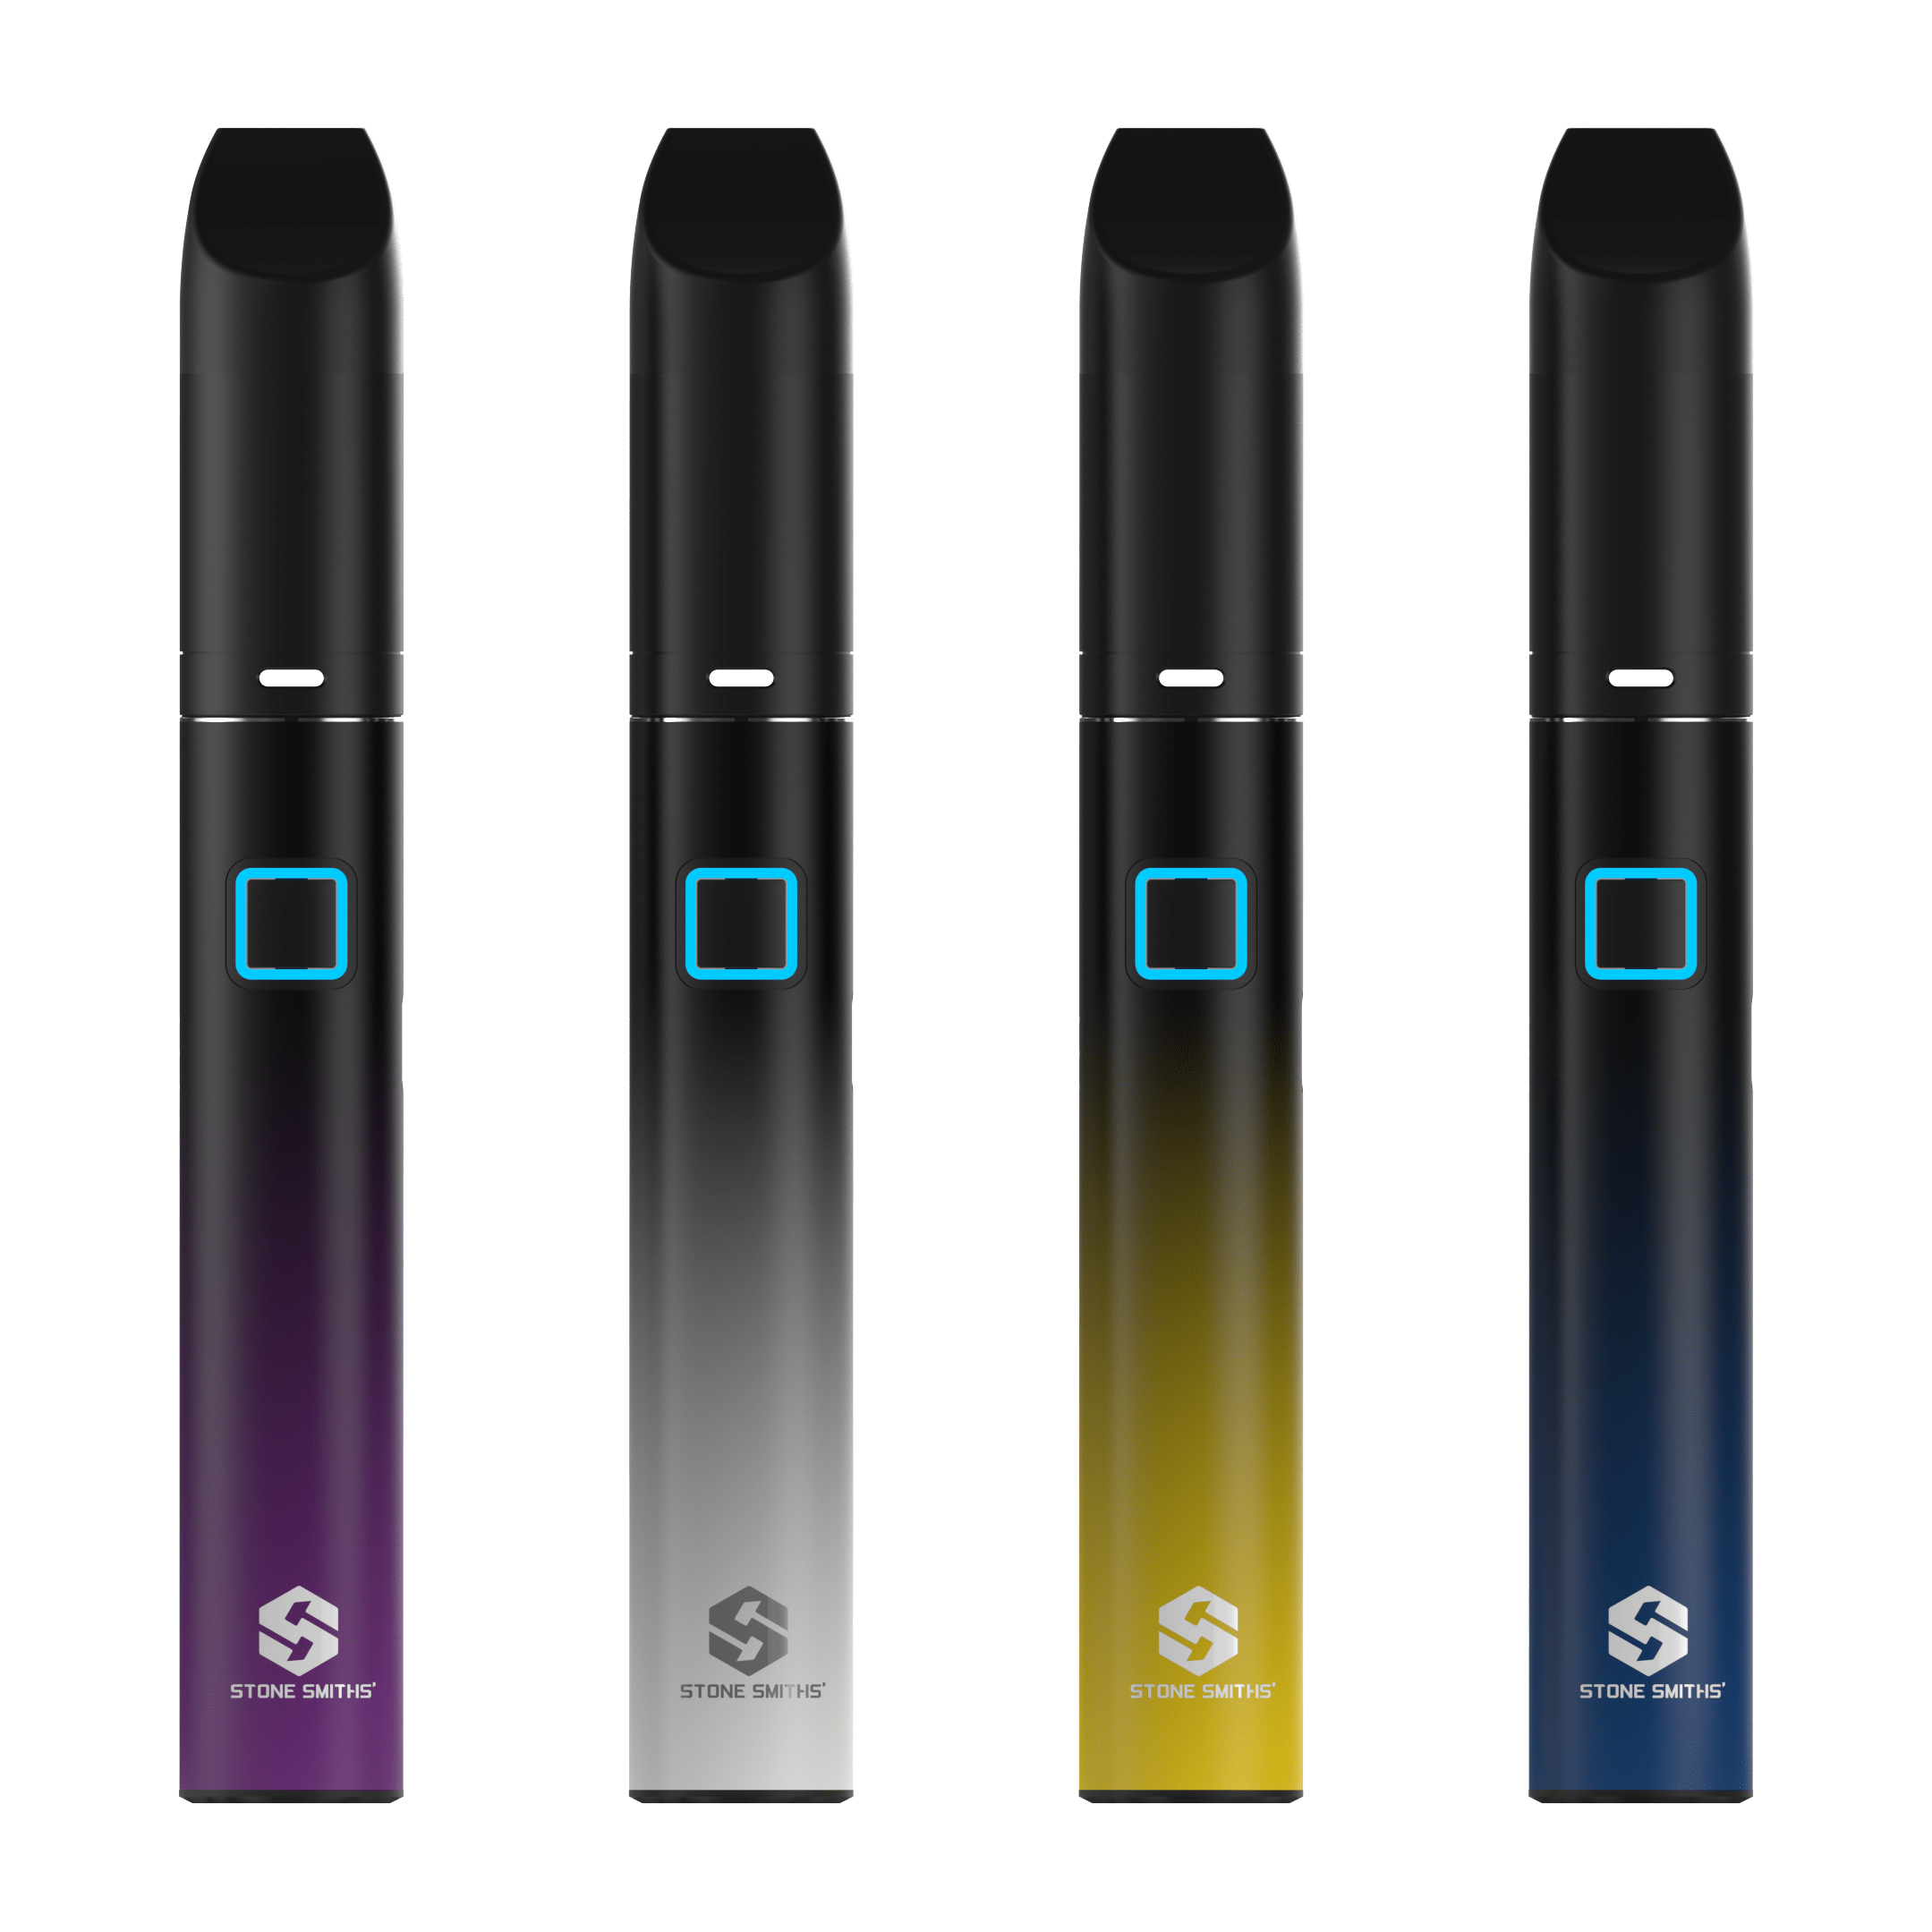 Stonesmiths' Device Piccolo Concentrate Vape Pen (Shipping on Oct 20~25) Approx. 45.6 USD